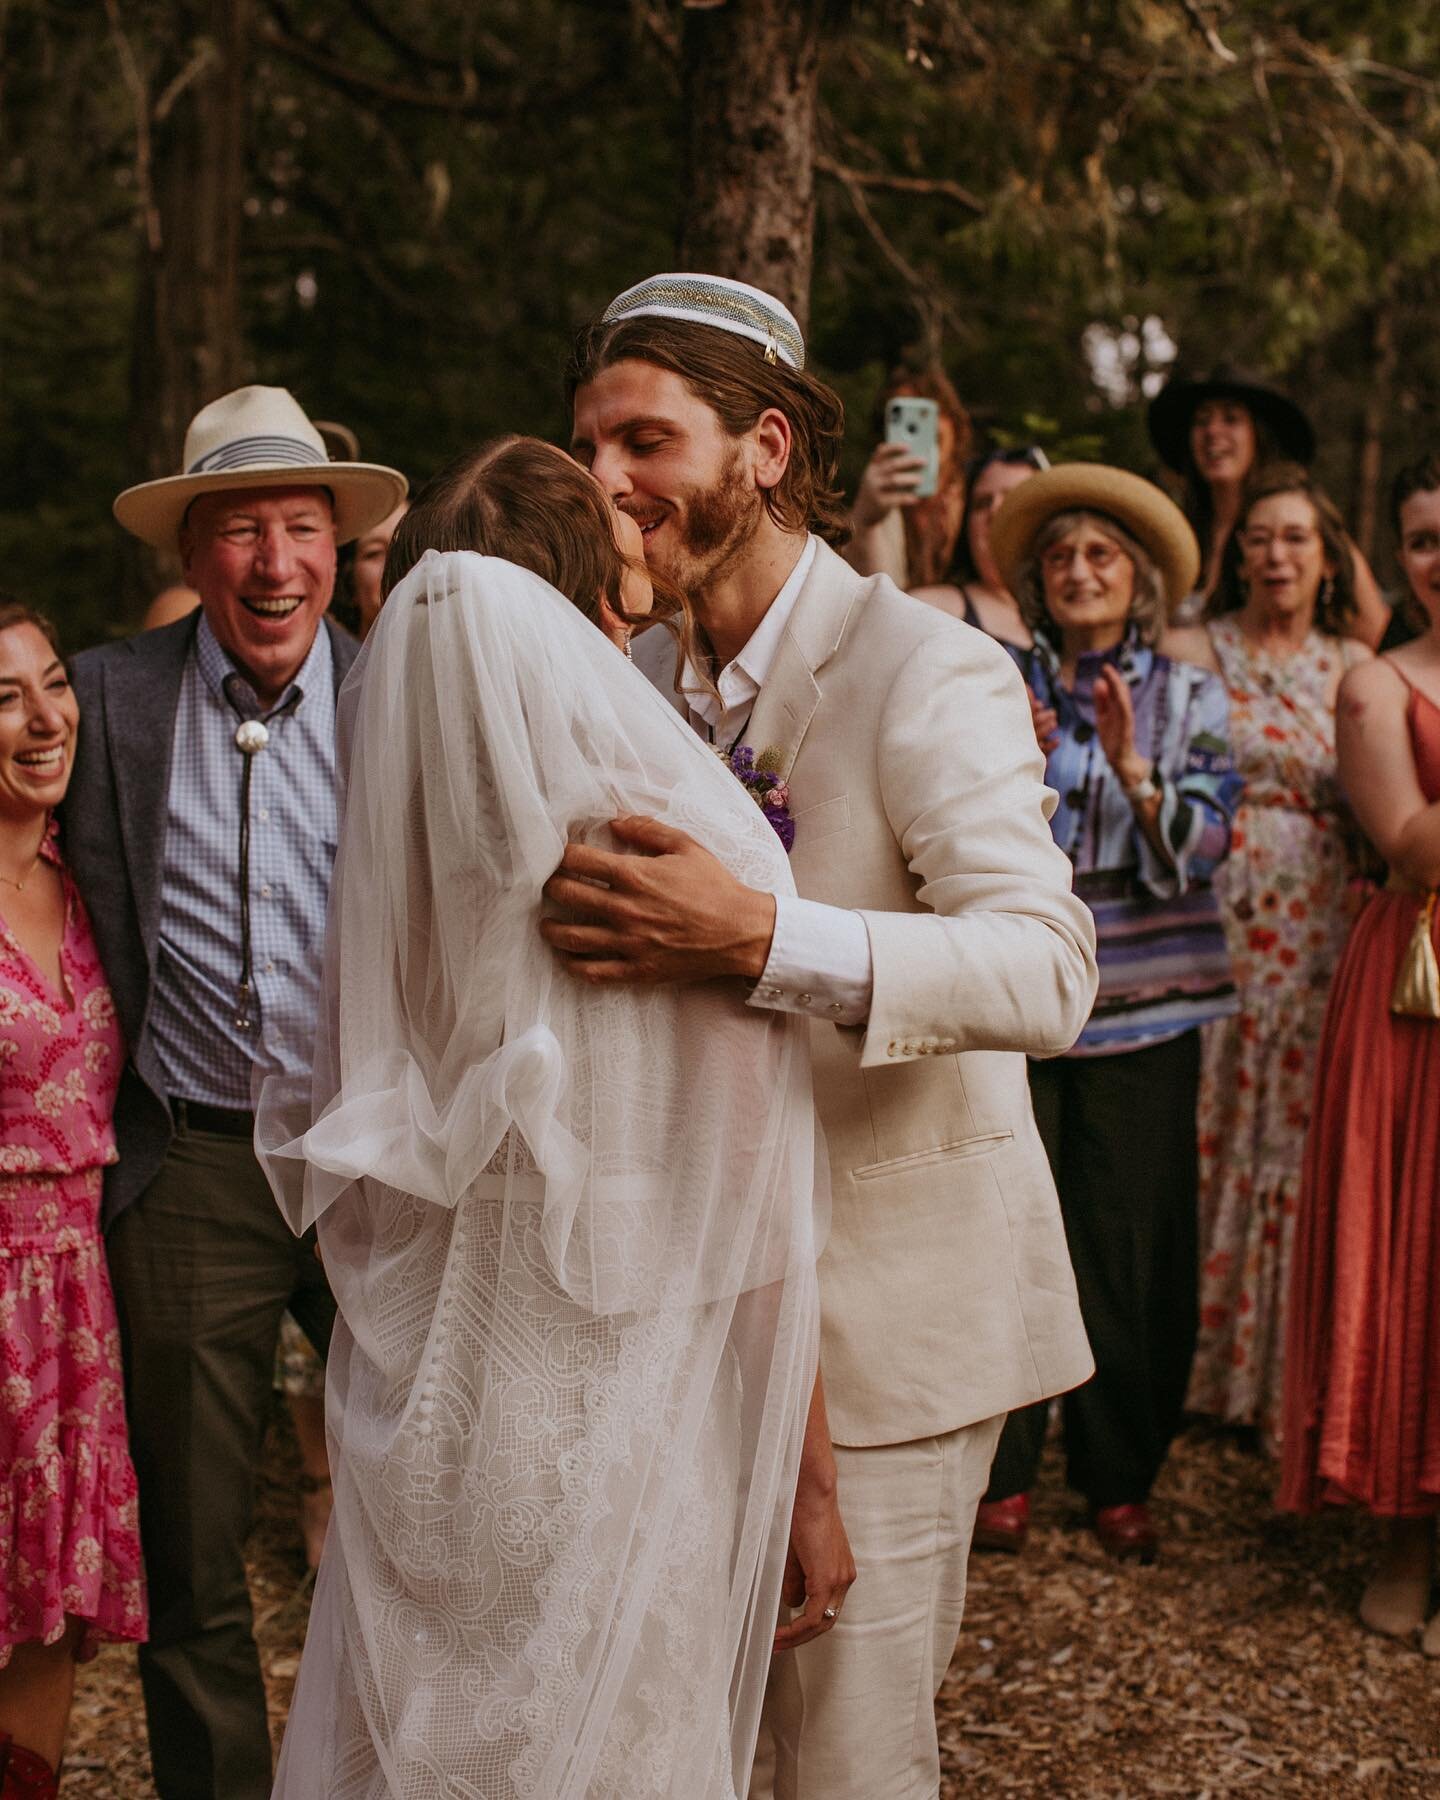 I&rsquo;ve been struggling with how to share photos from our wedding because it was such a sacred,  joyful, and transformational experience, for us of course and for many of our friends and family who celebrated with us.

Beyond getting married to th